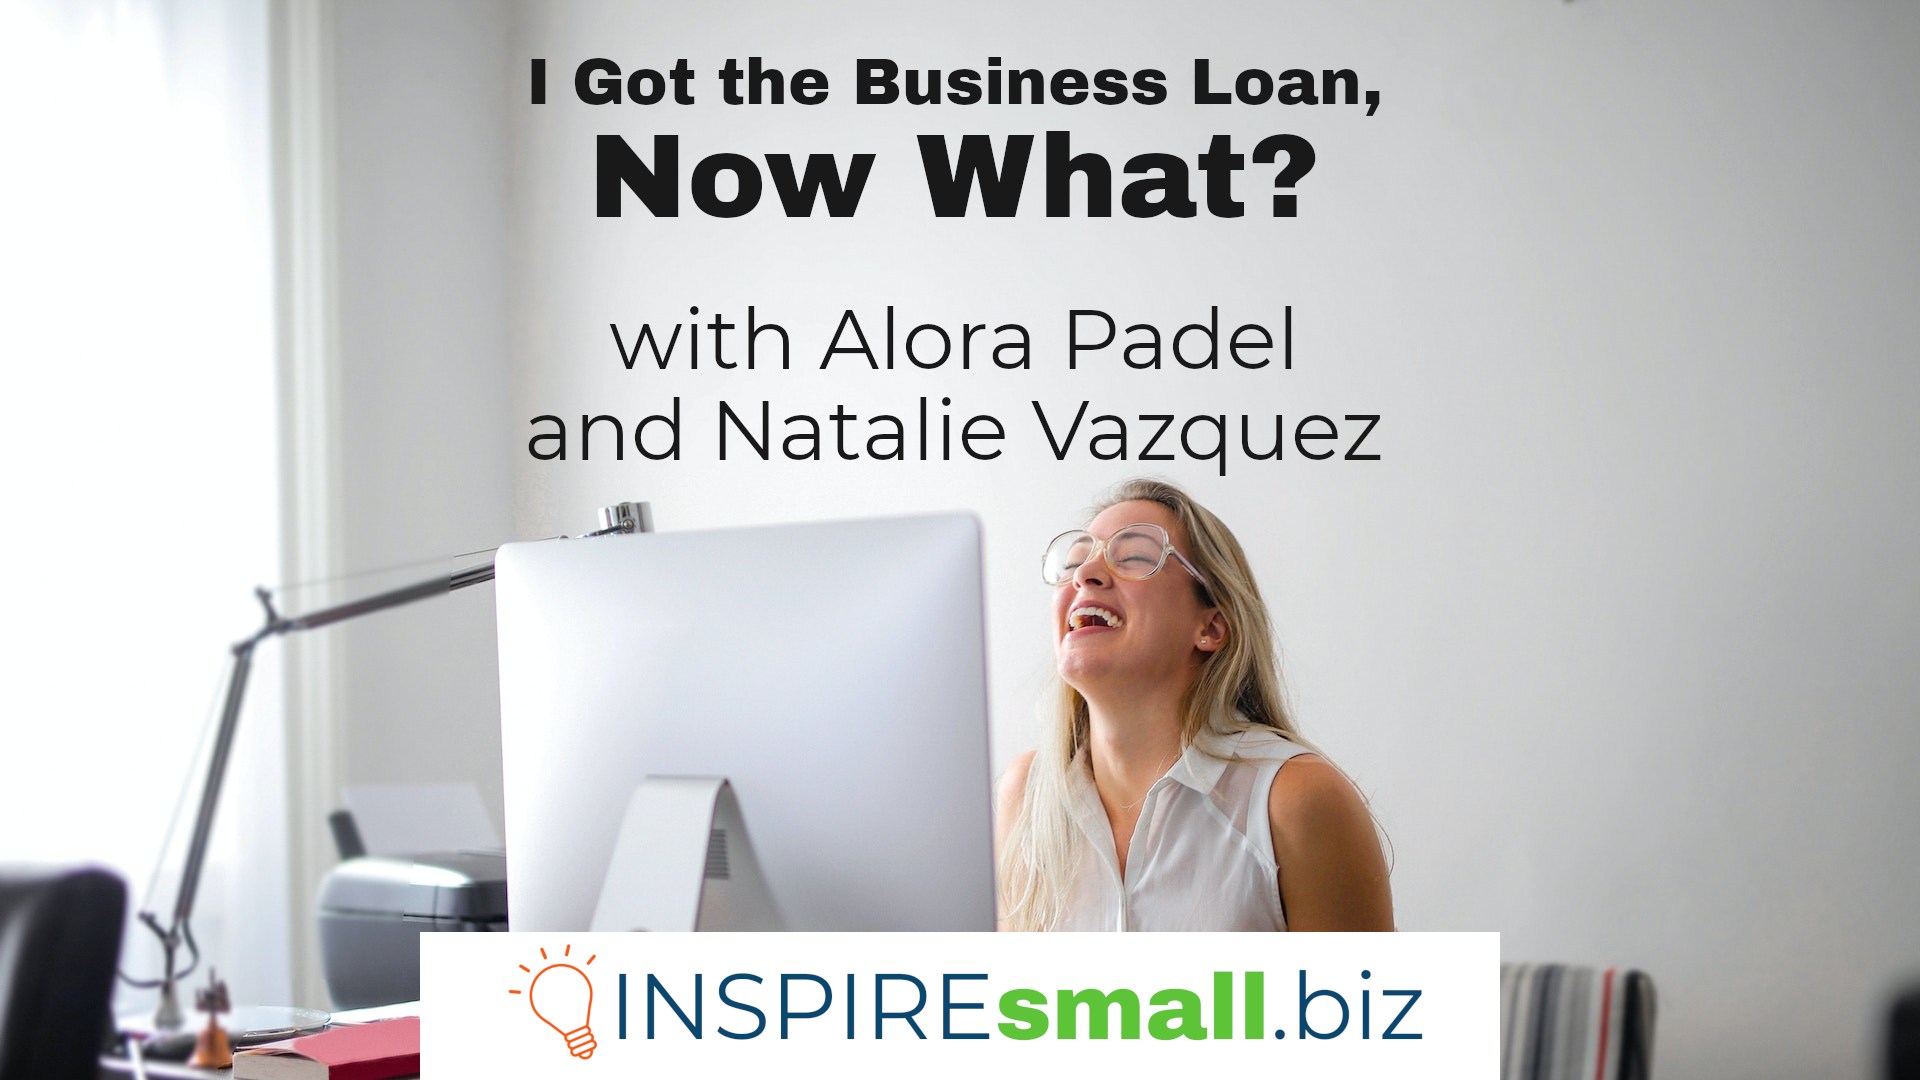 Alora Padel and Natalie Vazquez from Bankable join us to talk about the next steps your business should take after receiving a business loan.